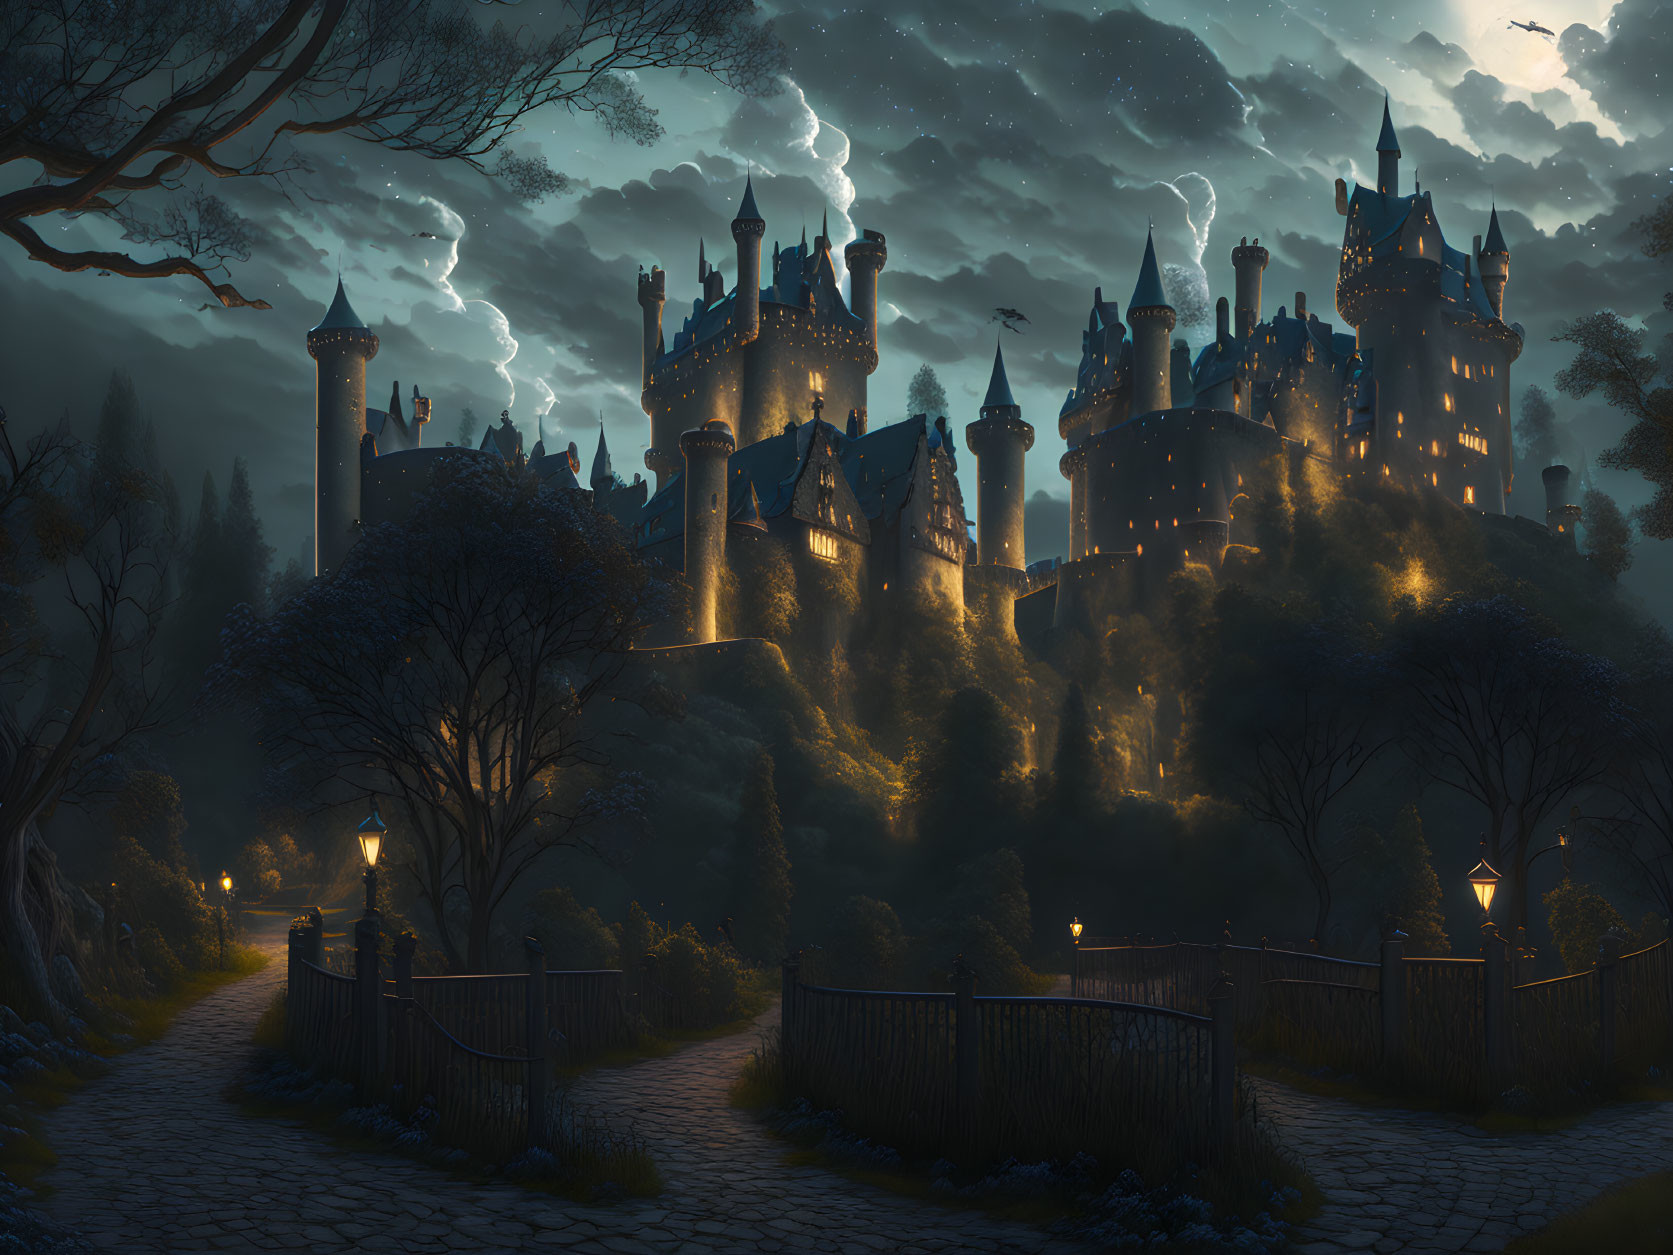 Majestic illuminated castle at night with spires and lightning-streaked clouds